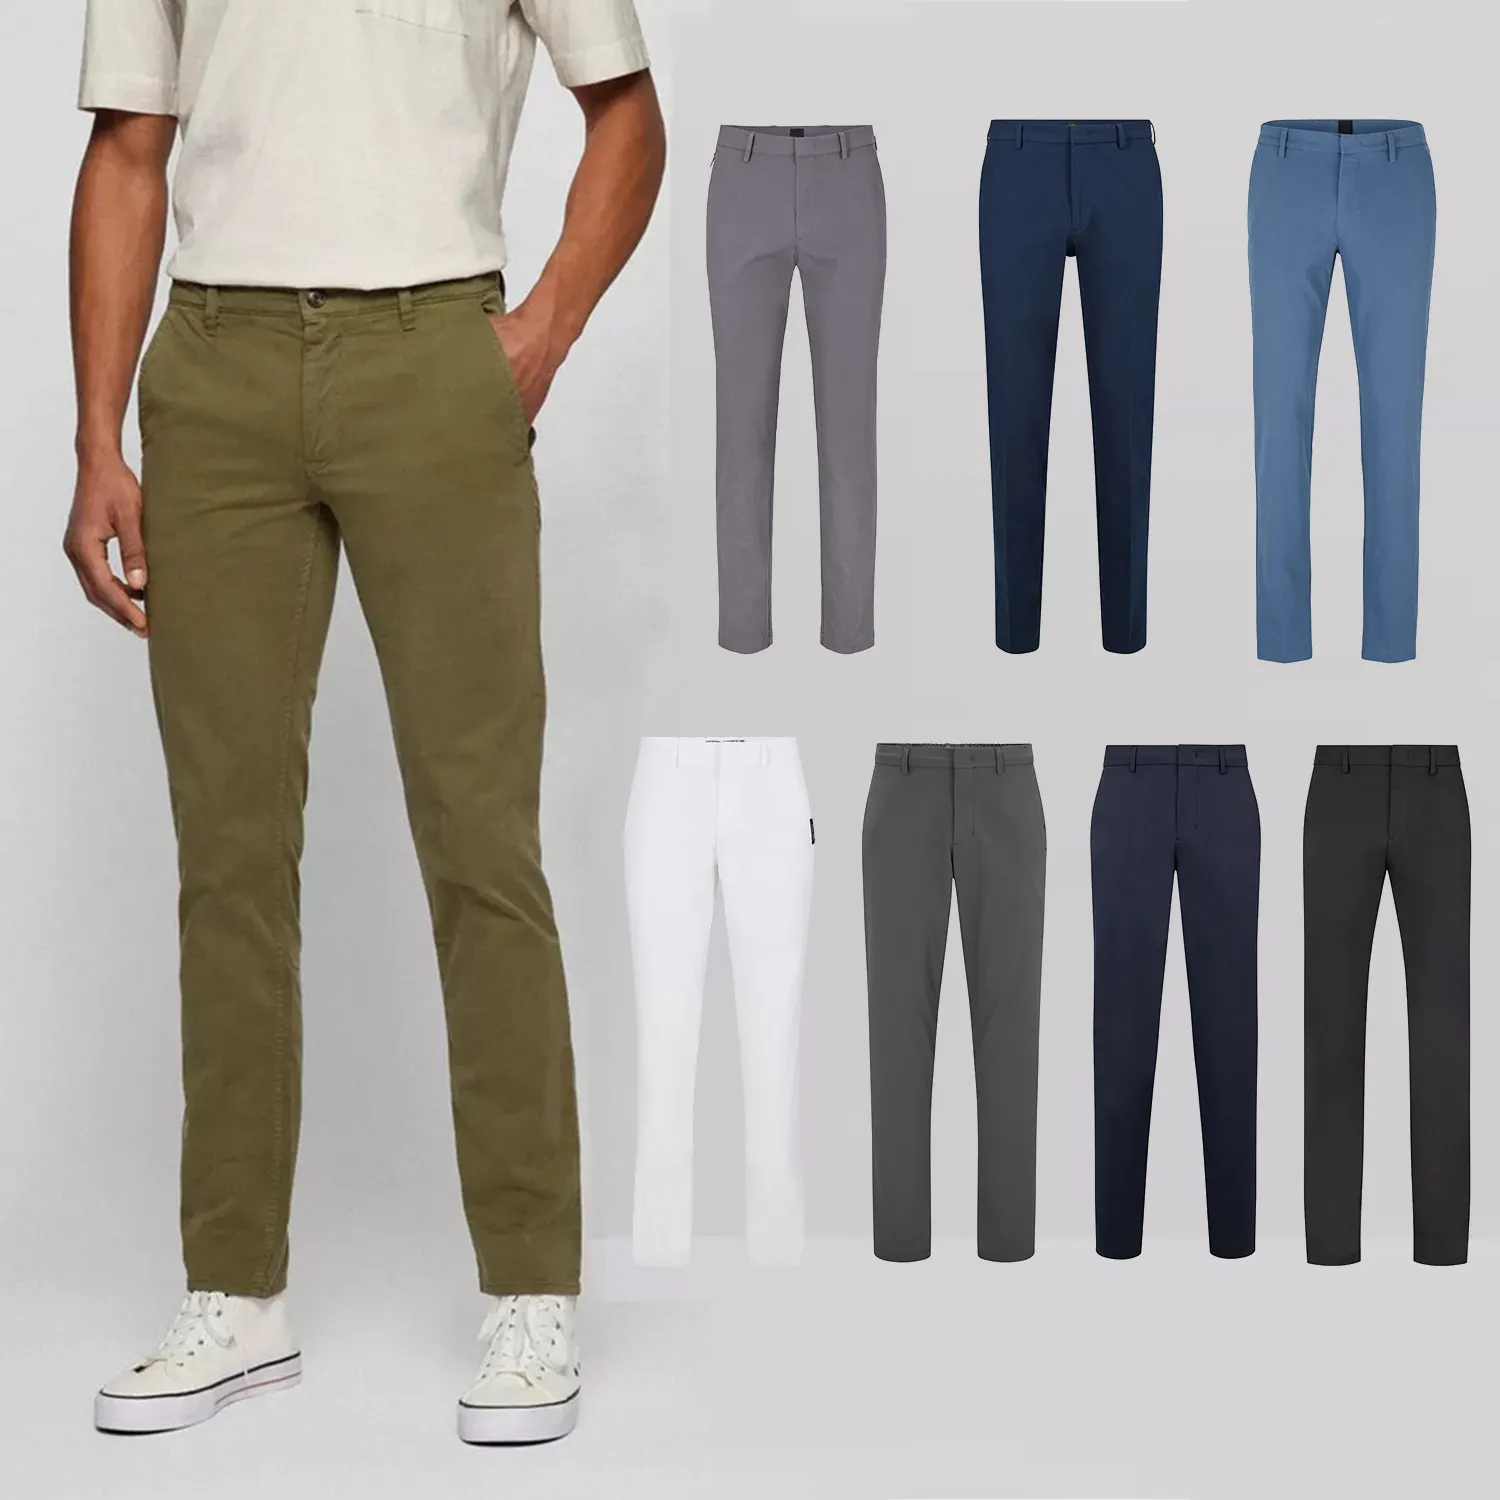 OEM Casual Mens Trousers Workwear Spandex Business Casual Pants